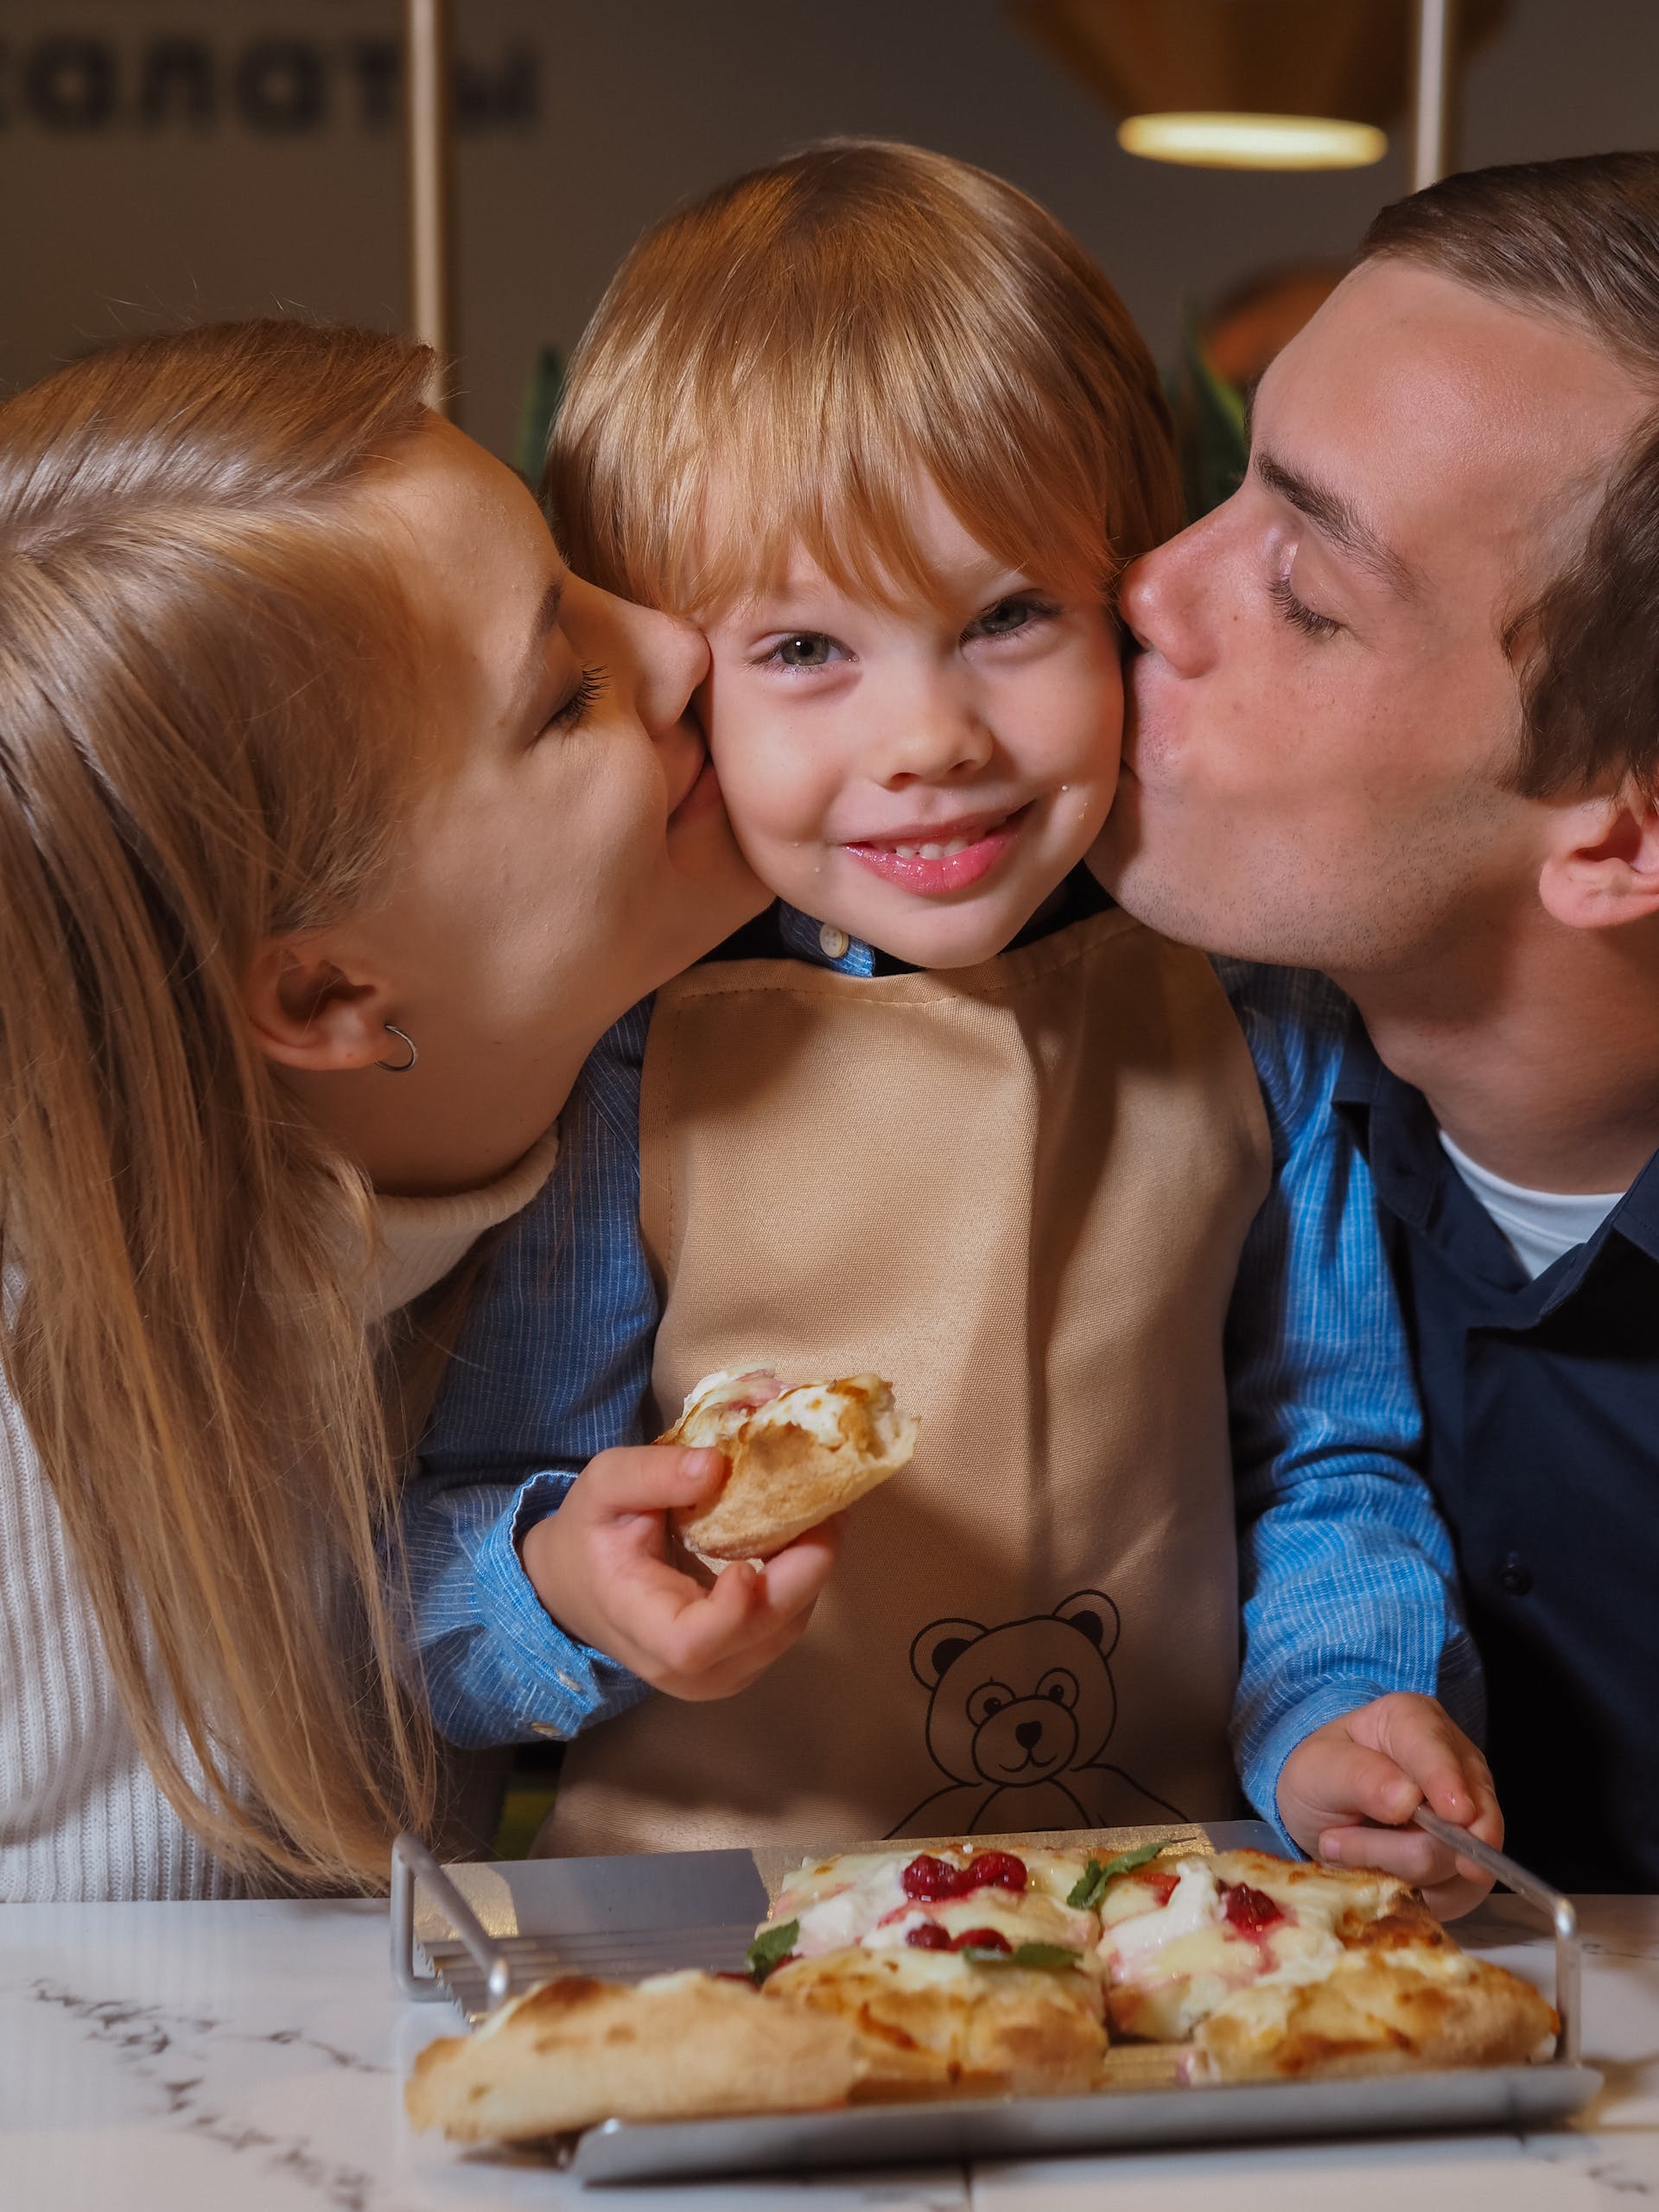 A couple kissing their little son | Source: Pexels